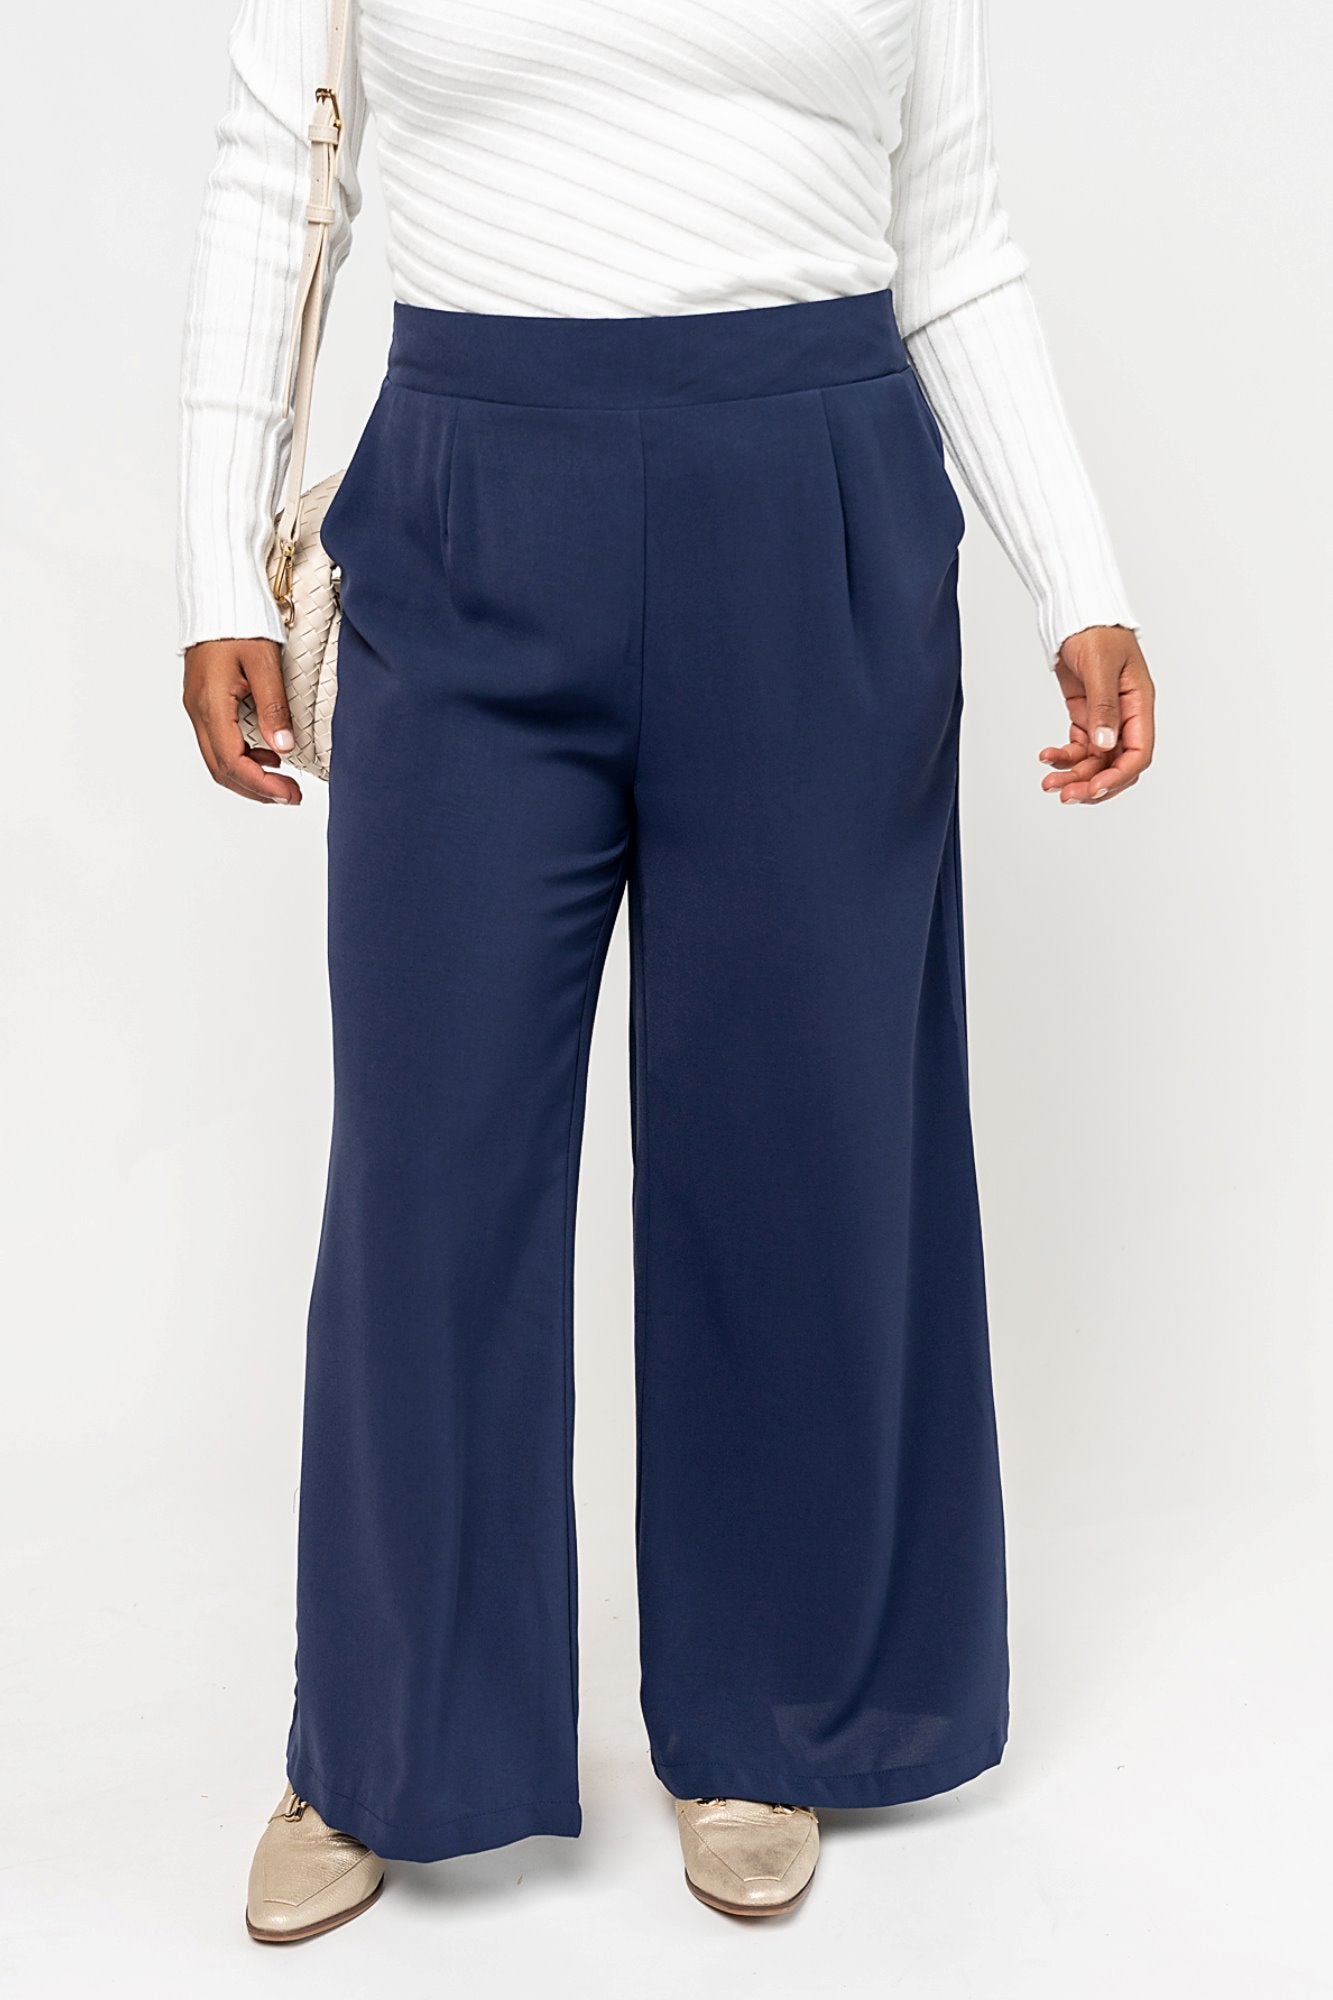 Jovie Pant in Navy (Small-XL) Holley Girl 